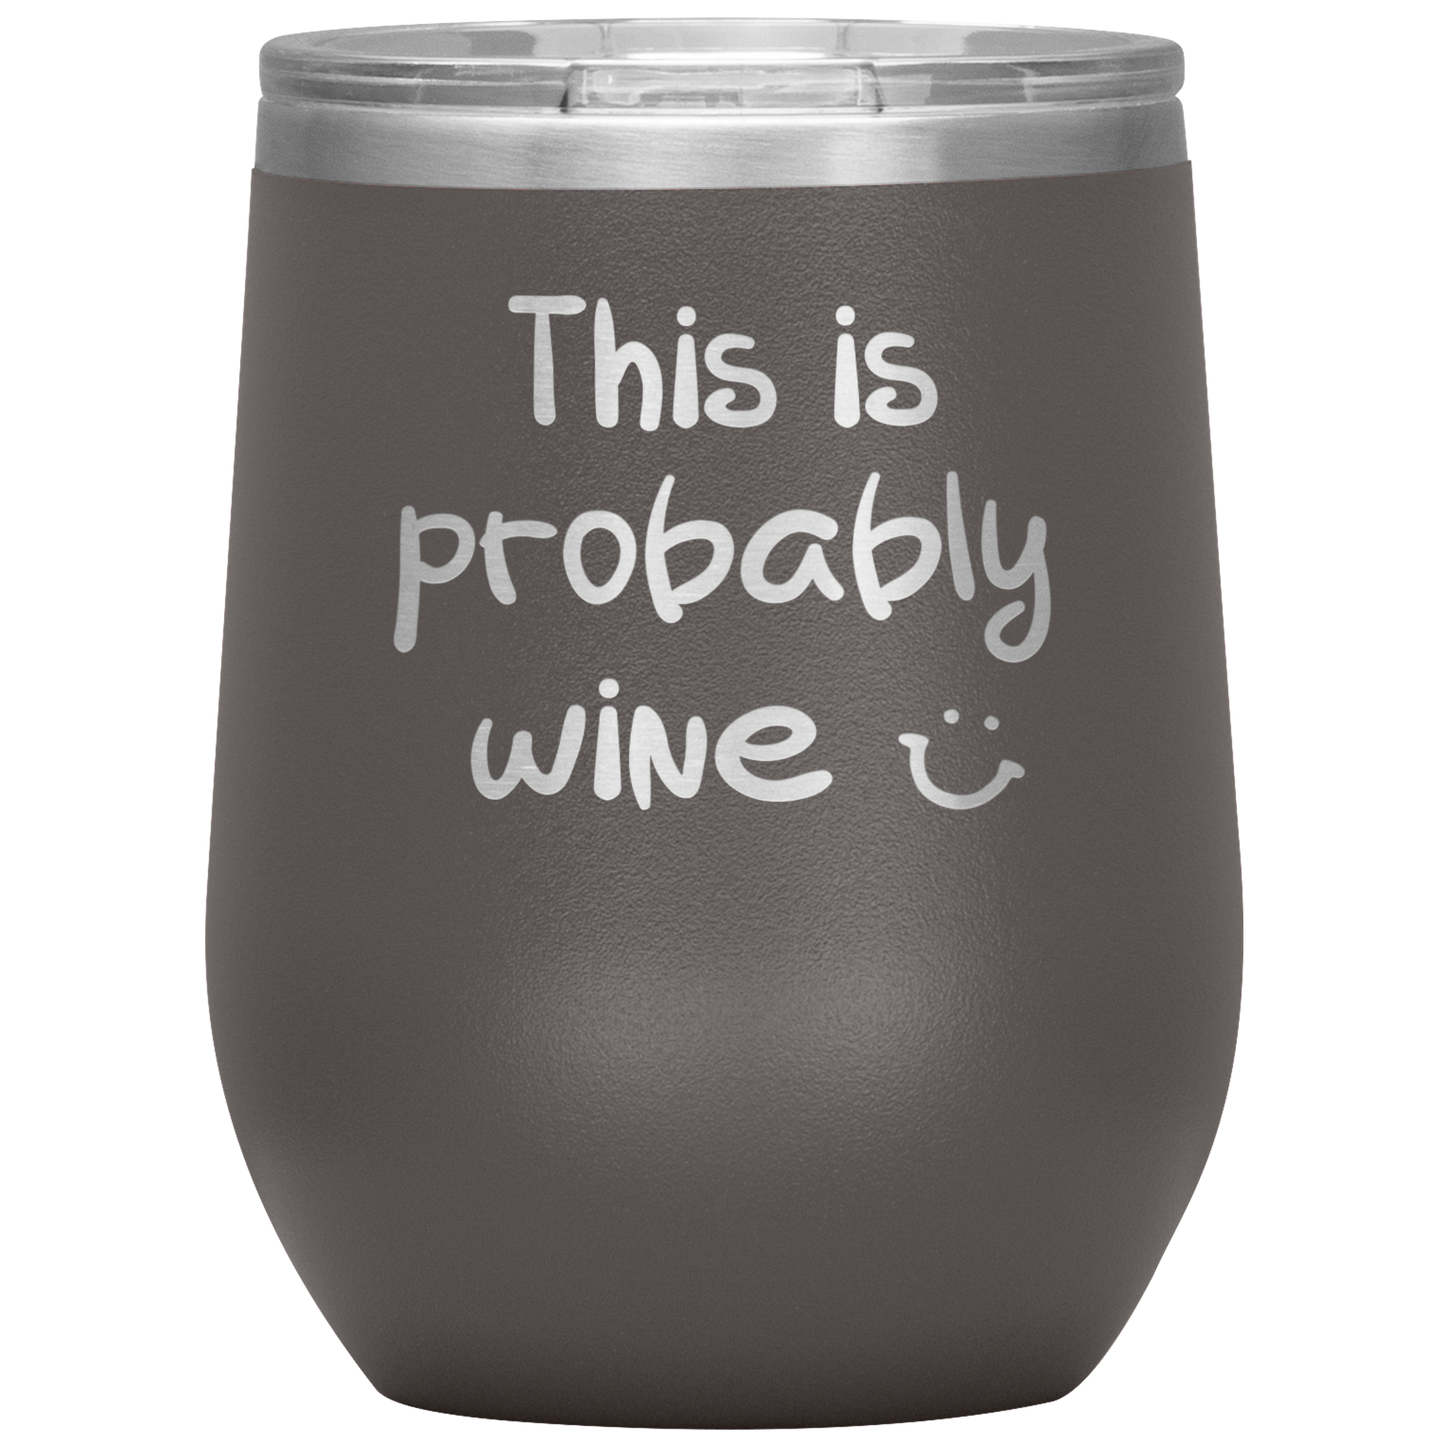 This is Probably Wine" 12 oz. Insulated Stainless Steel Wine Tumbler with Lid